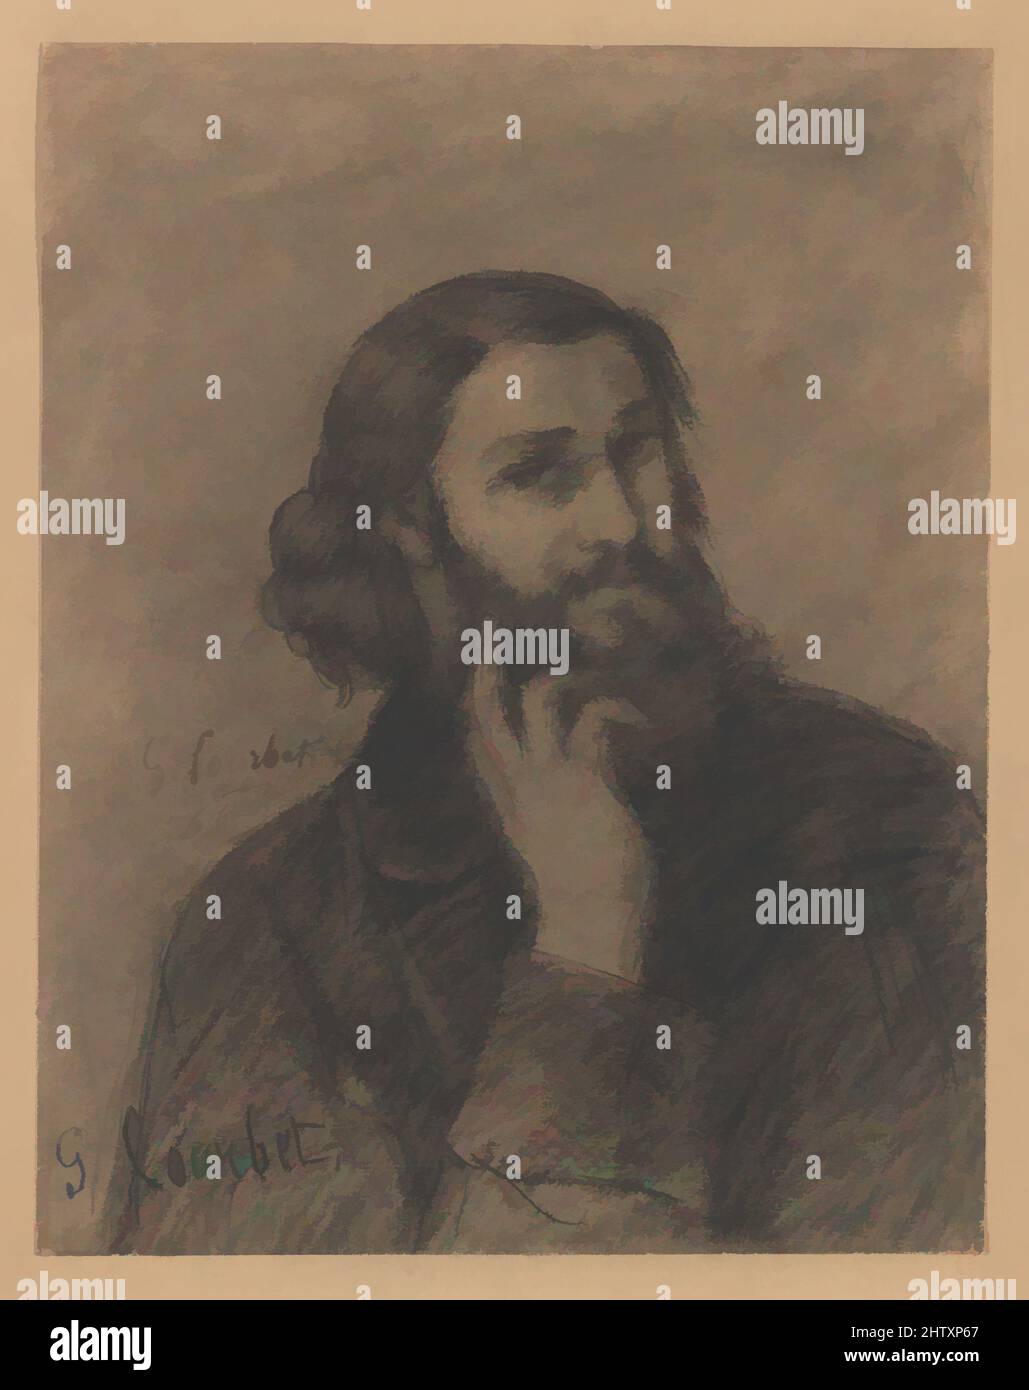 Art inspired by Self-Portrait, ca. 1866, Conté crayon, sheet: 10 1/2 x 8 1/4 in. (26.7 x 21 cm), Drawings, Gustave Courbet (French, Ornans 1819–1877 La Tour-de-Peilz, Classic works modernized by Artotop with a splash of modernity. Shapes, color and value, eye-catching visual impact on art. Emotions through freedom of artworks in a contemporary way. A timeless message pursuing a wildly creative new direction. Artists turning to the digital medium and creating the Artotop NFT Stock Photo